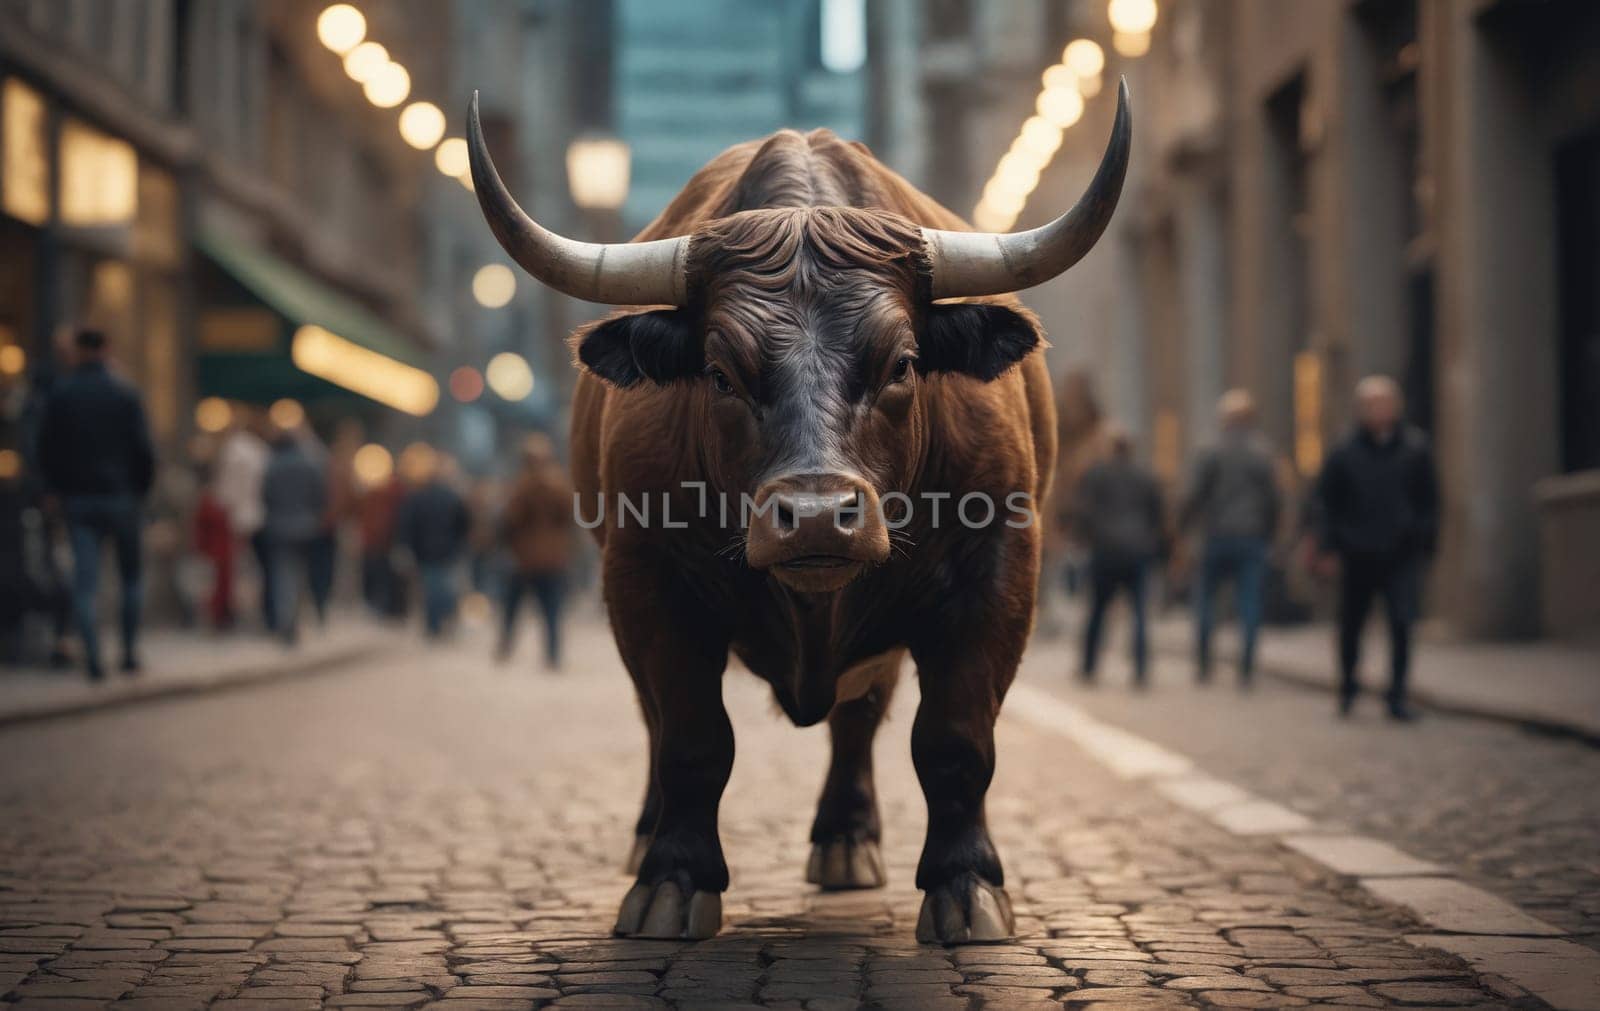 A bull stands alert on cobblestone streets, horns poised, as city life unfolds in the soft-focused background.